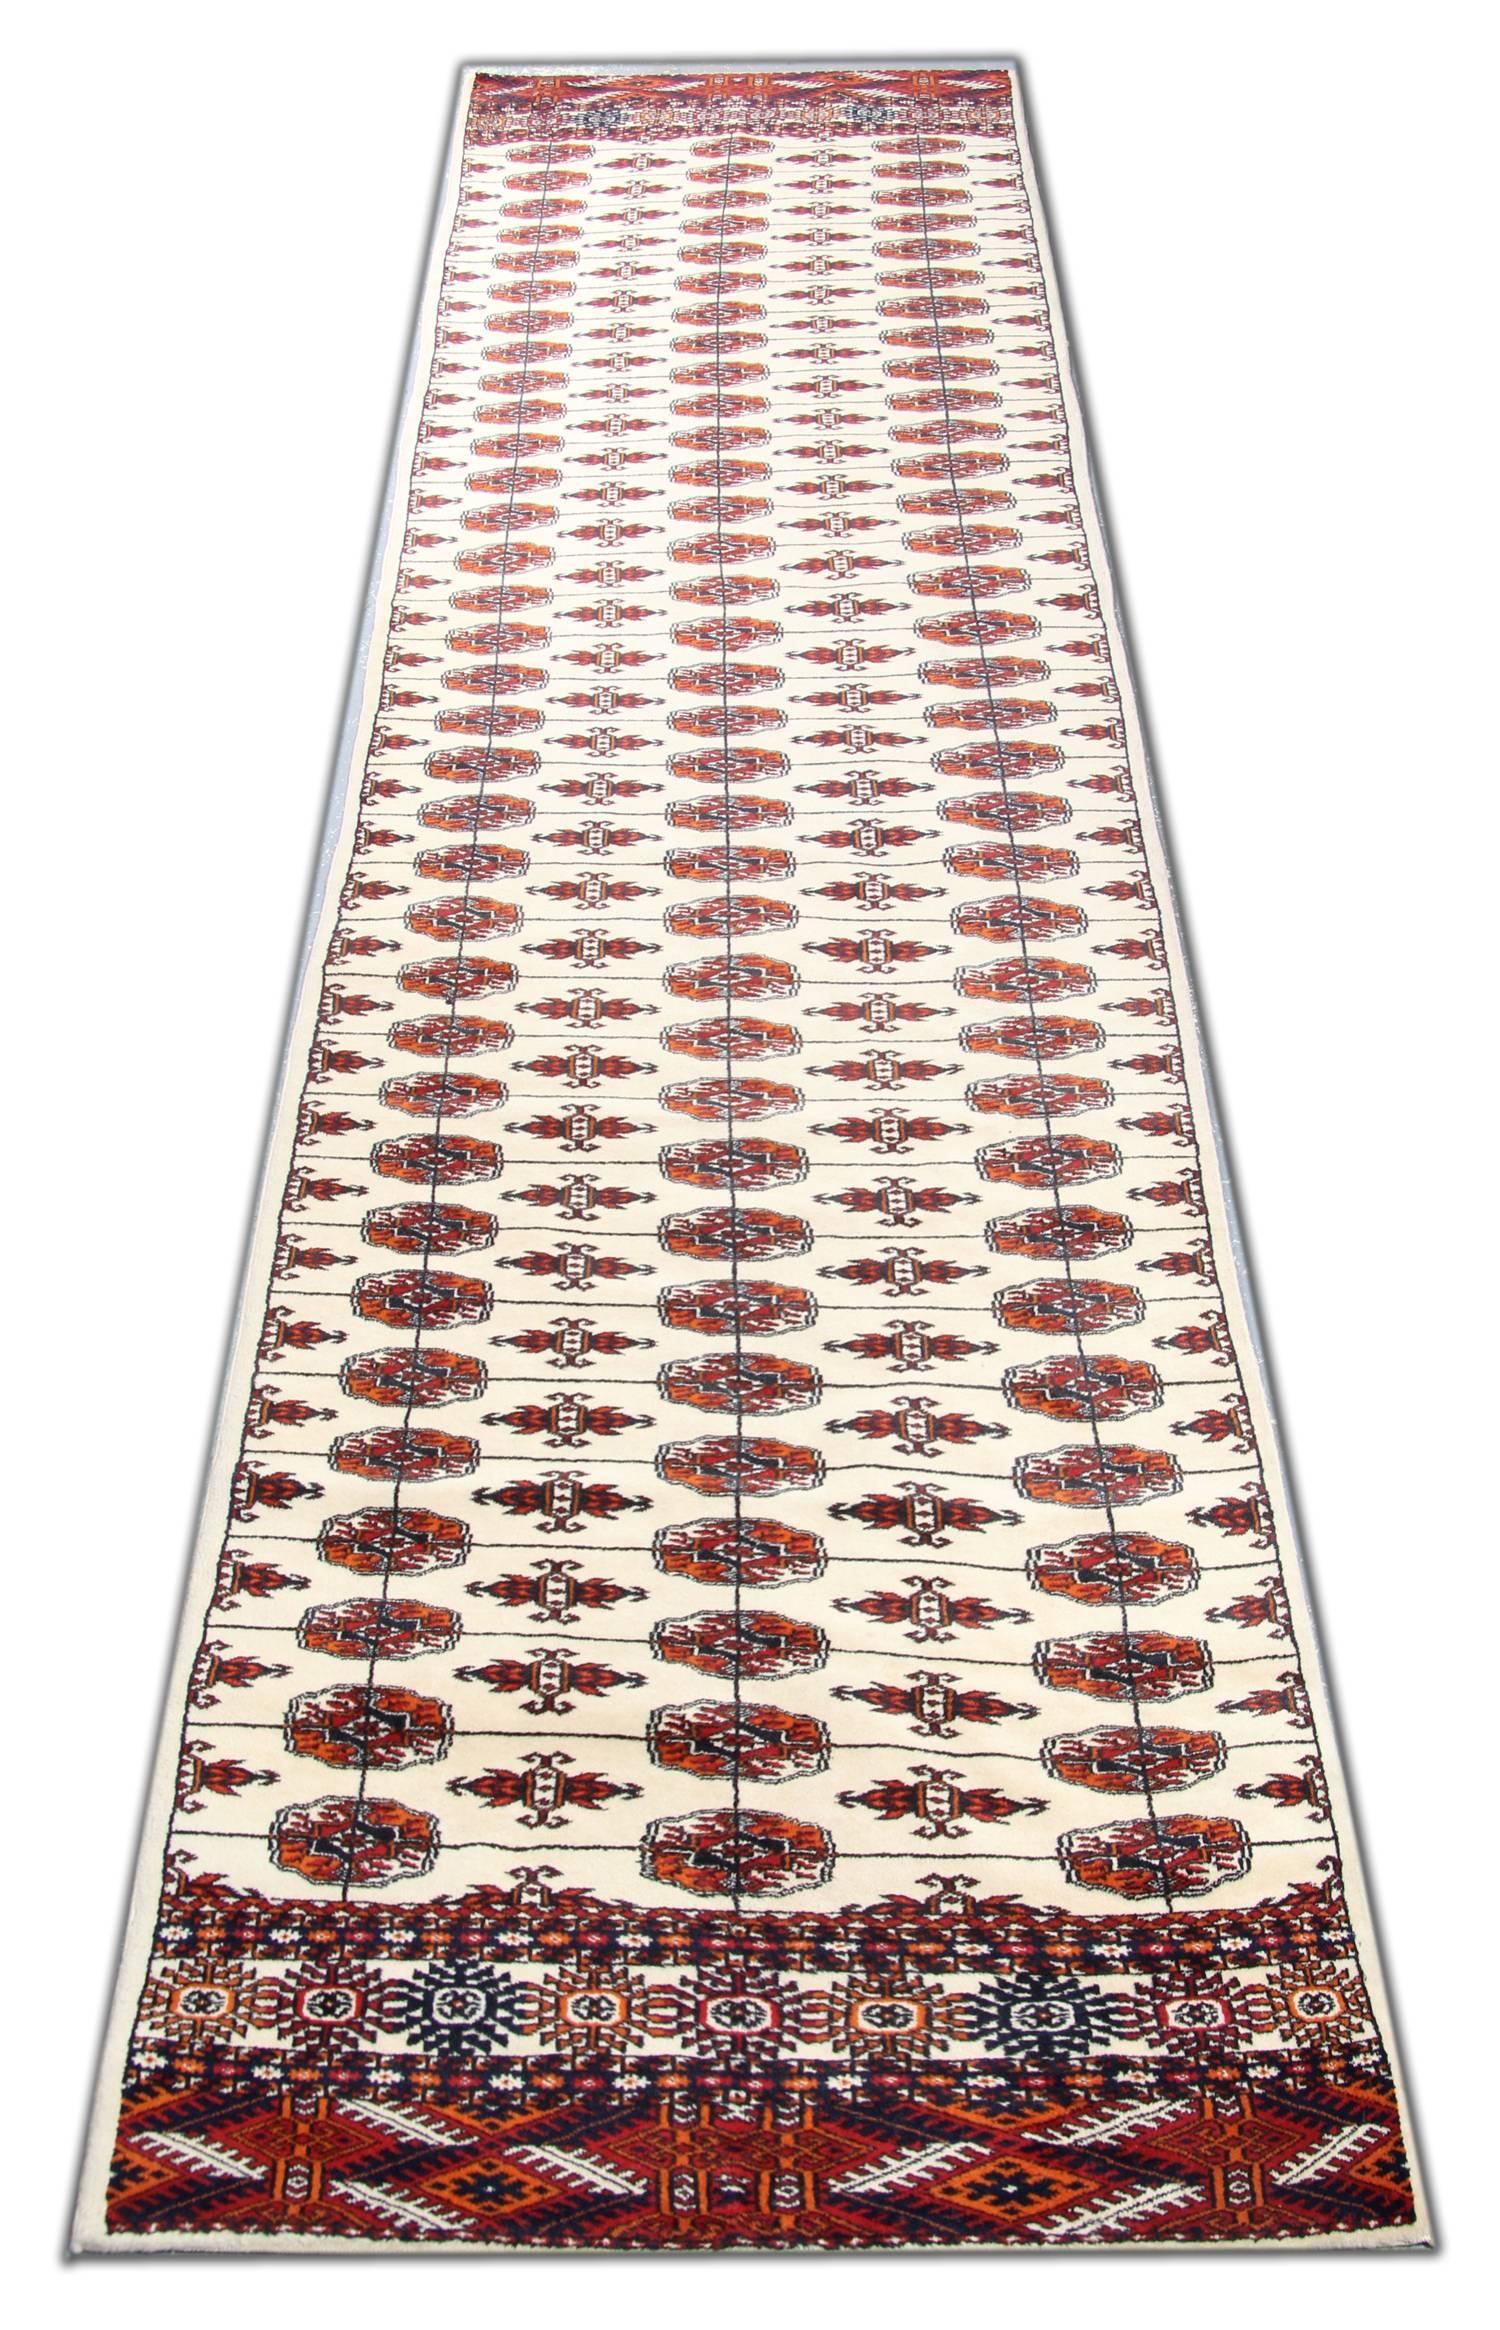 Turkman Bokhara rugs and hallway runners are hand knotted in Pakistan by master weavers in a traditional elephant's foot motif. The 100% Wool pile is dyed and washed to create a lustre unique to this Classic collection. Buy online for huge savings